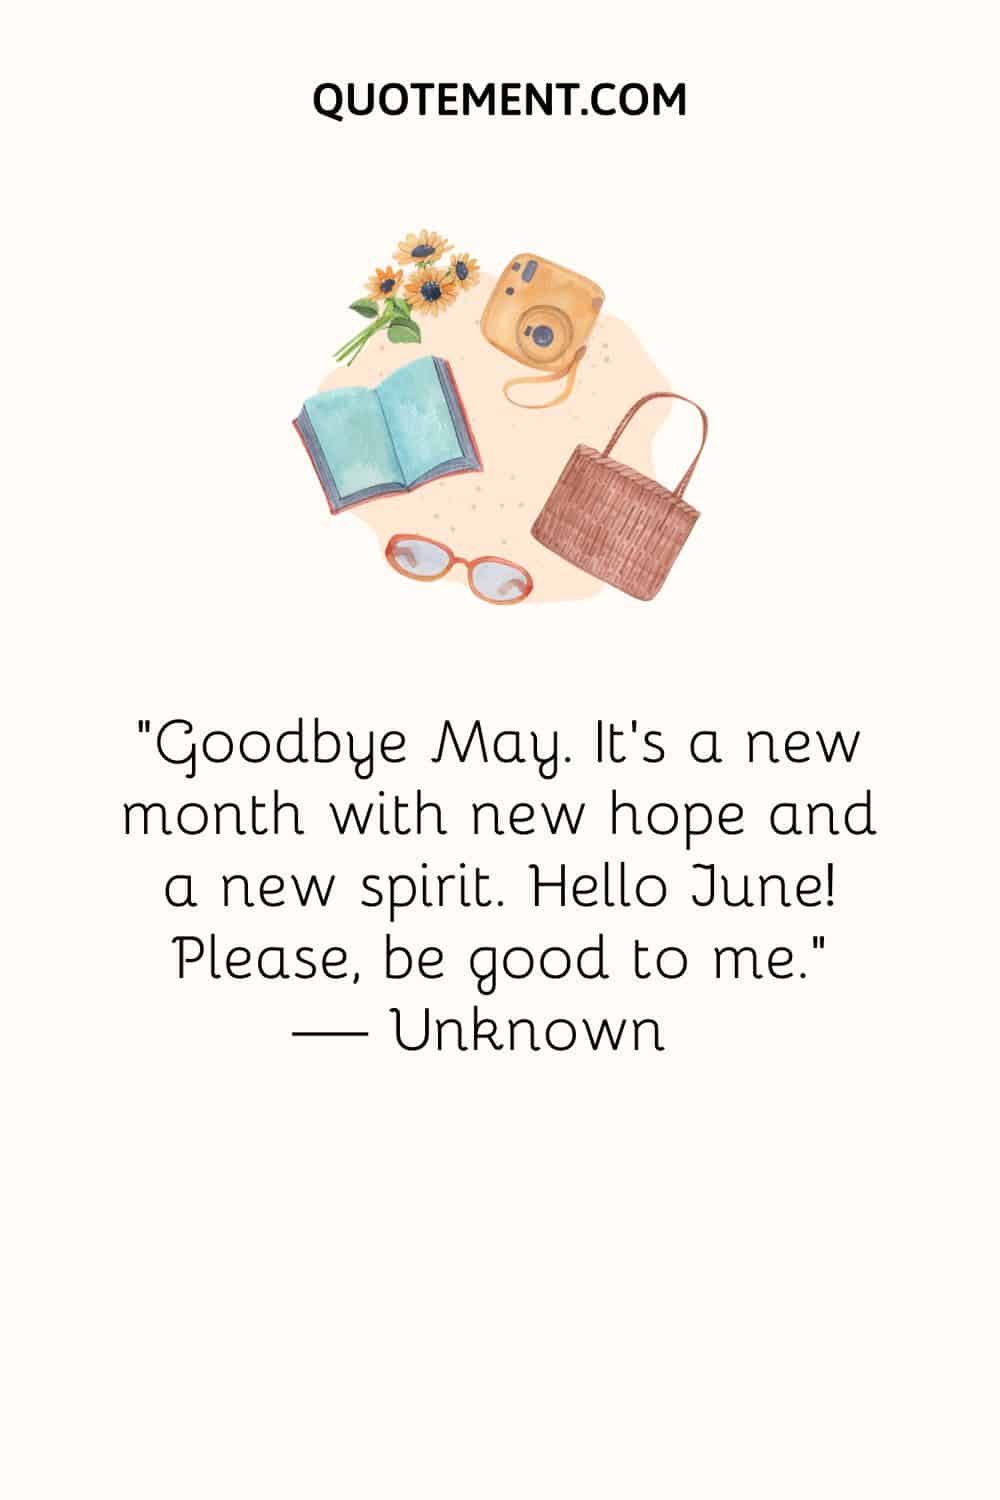 image of a camera, glasses, book, purse, and flowers representing goodbye May hello June quote